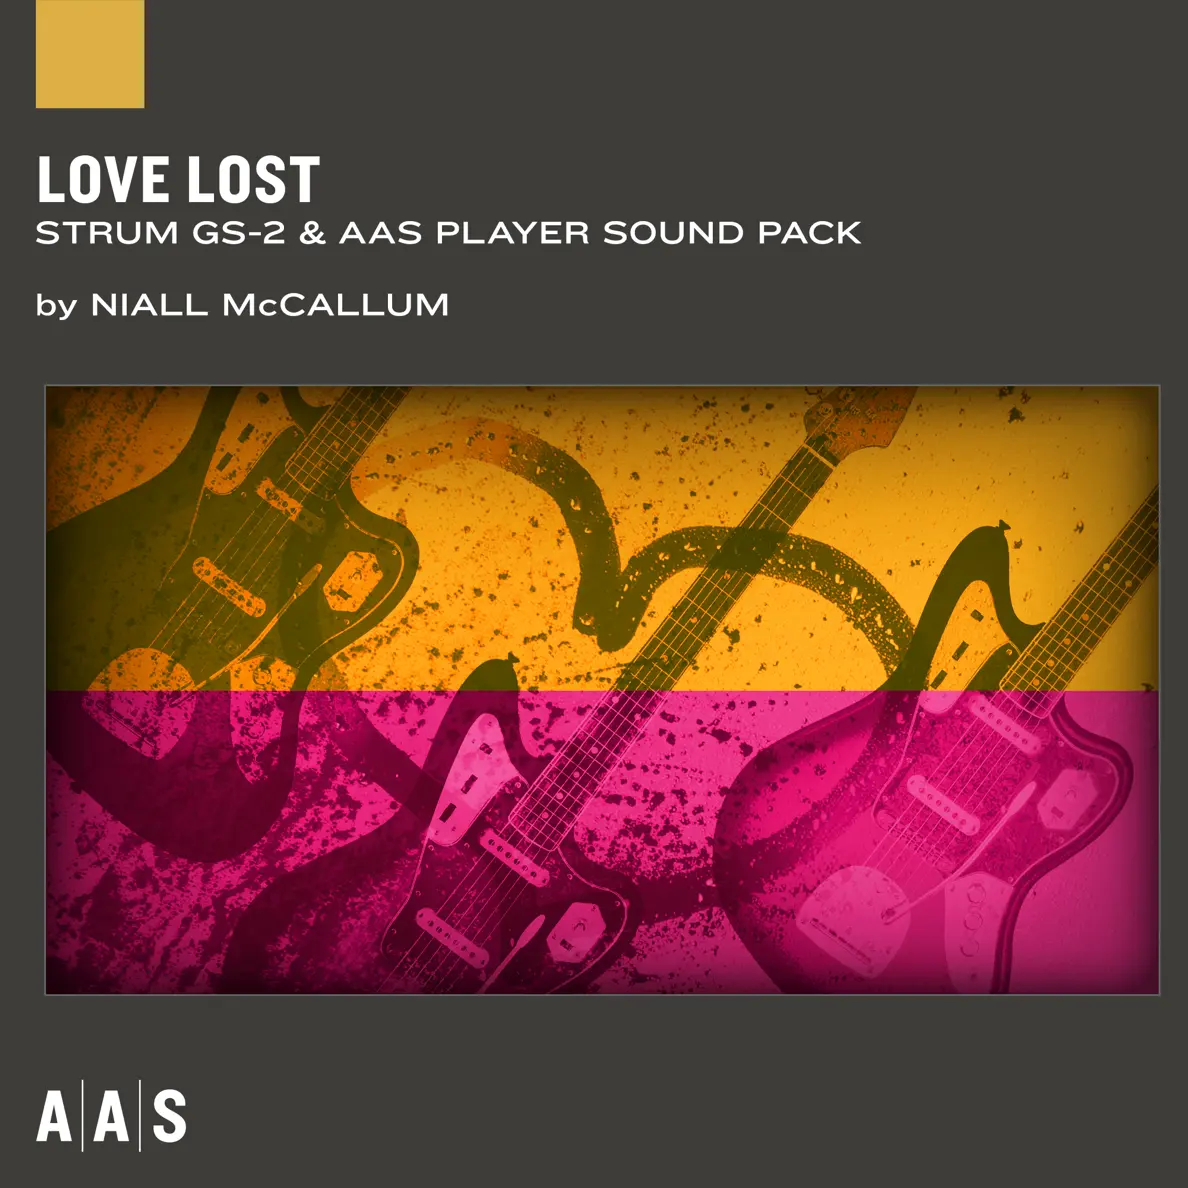 Strum and AAS Player sound pack ： LOVE LOST